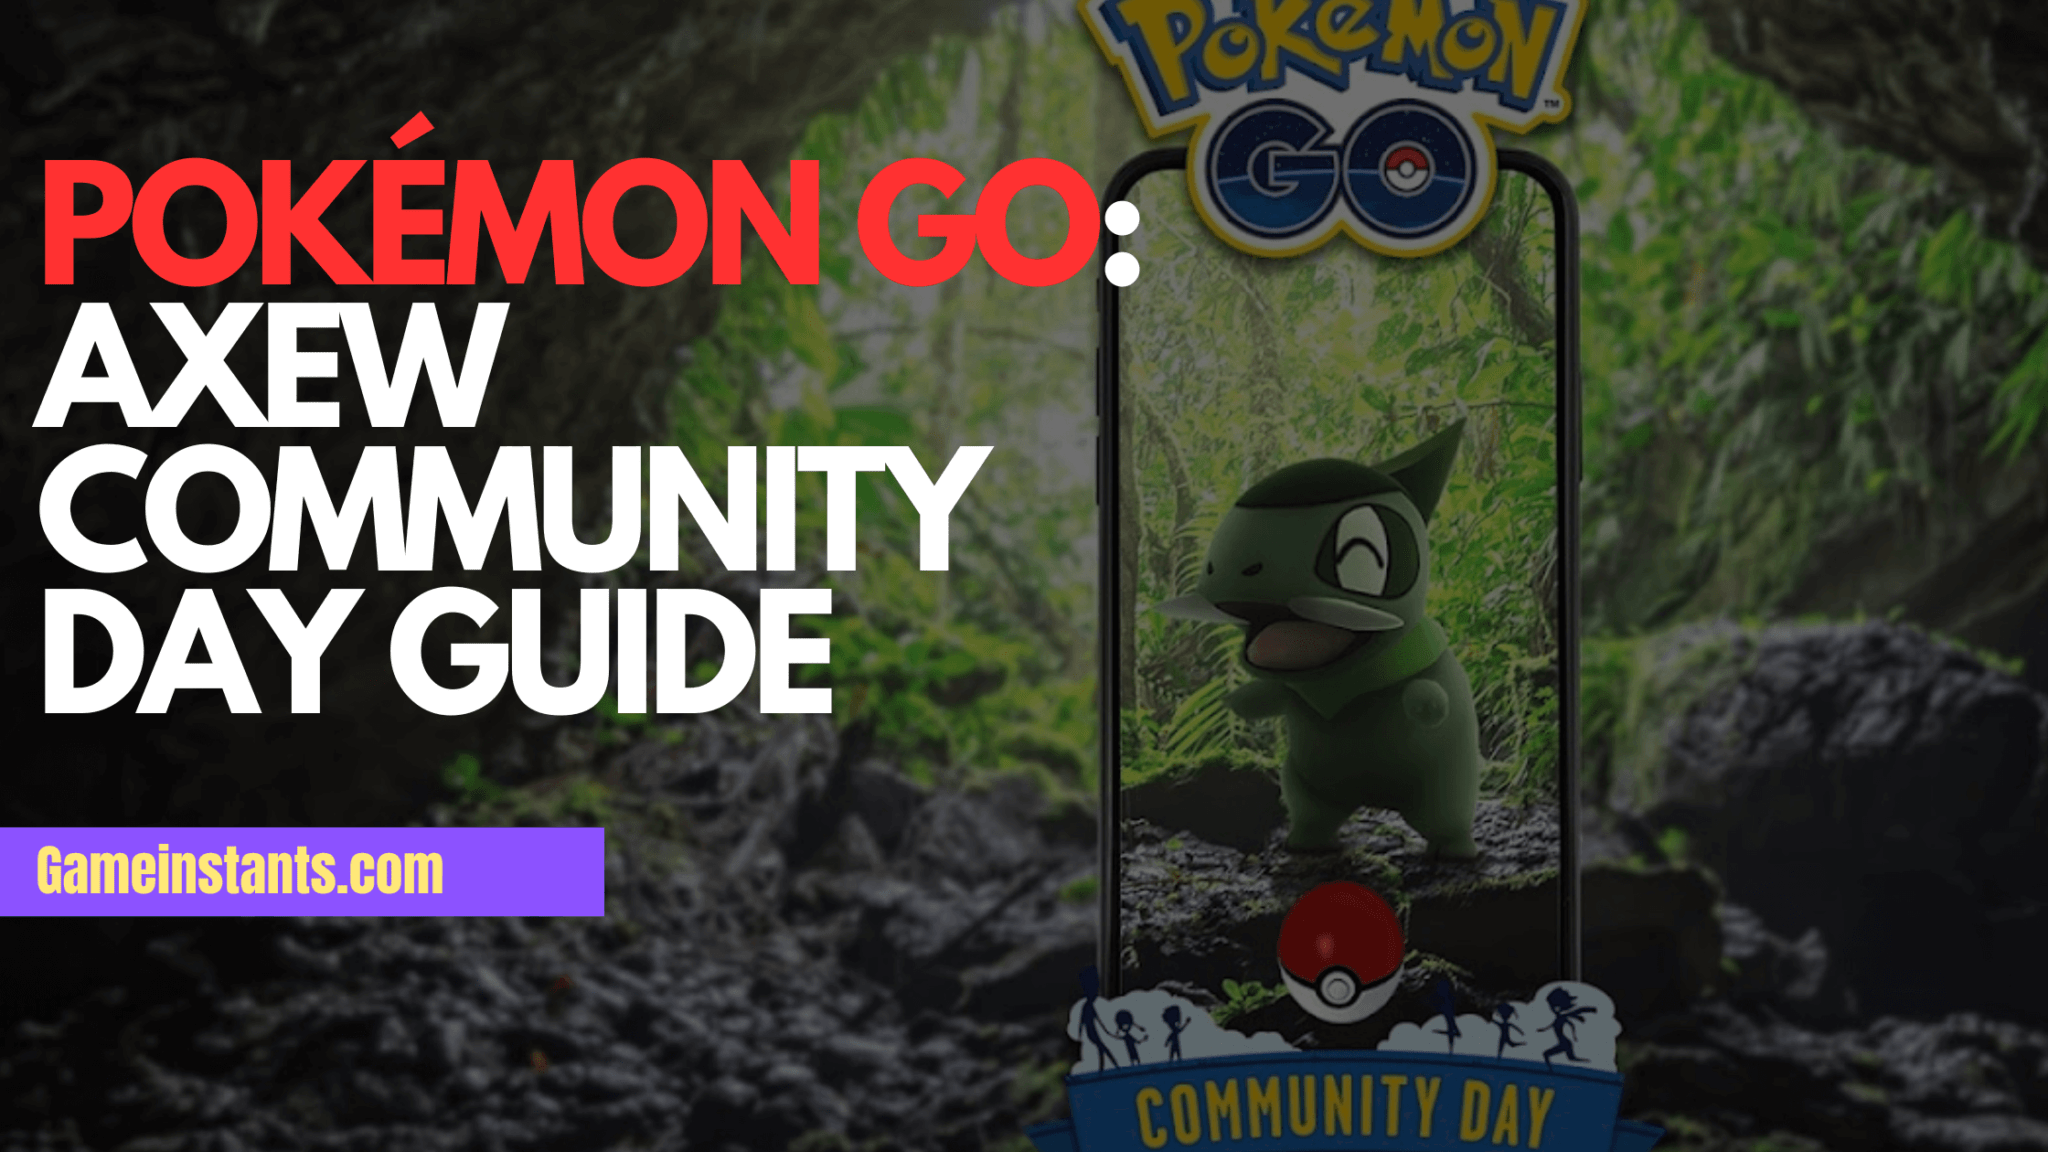 Pokémon Go Axew Community Day Guide Gameinstants